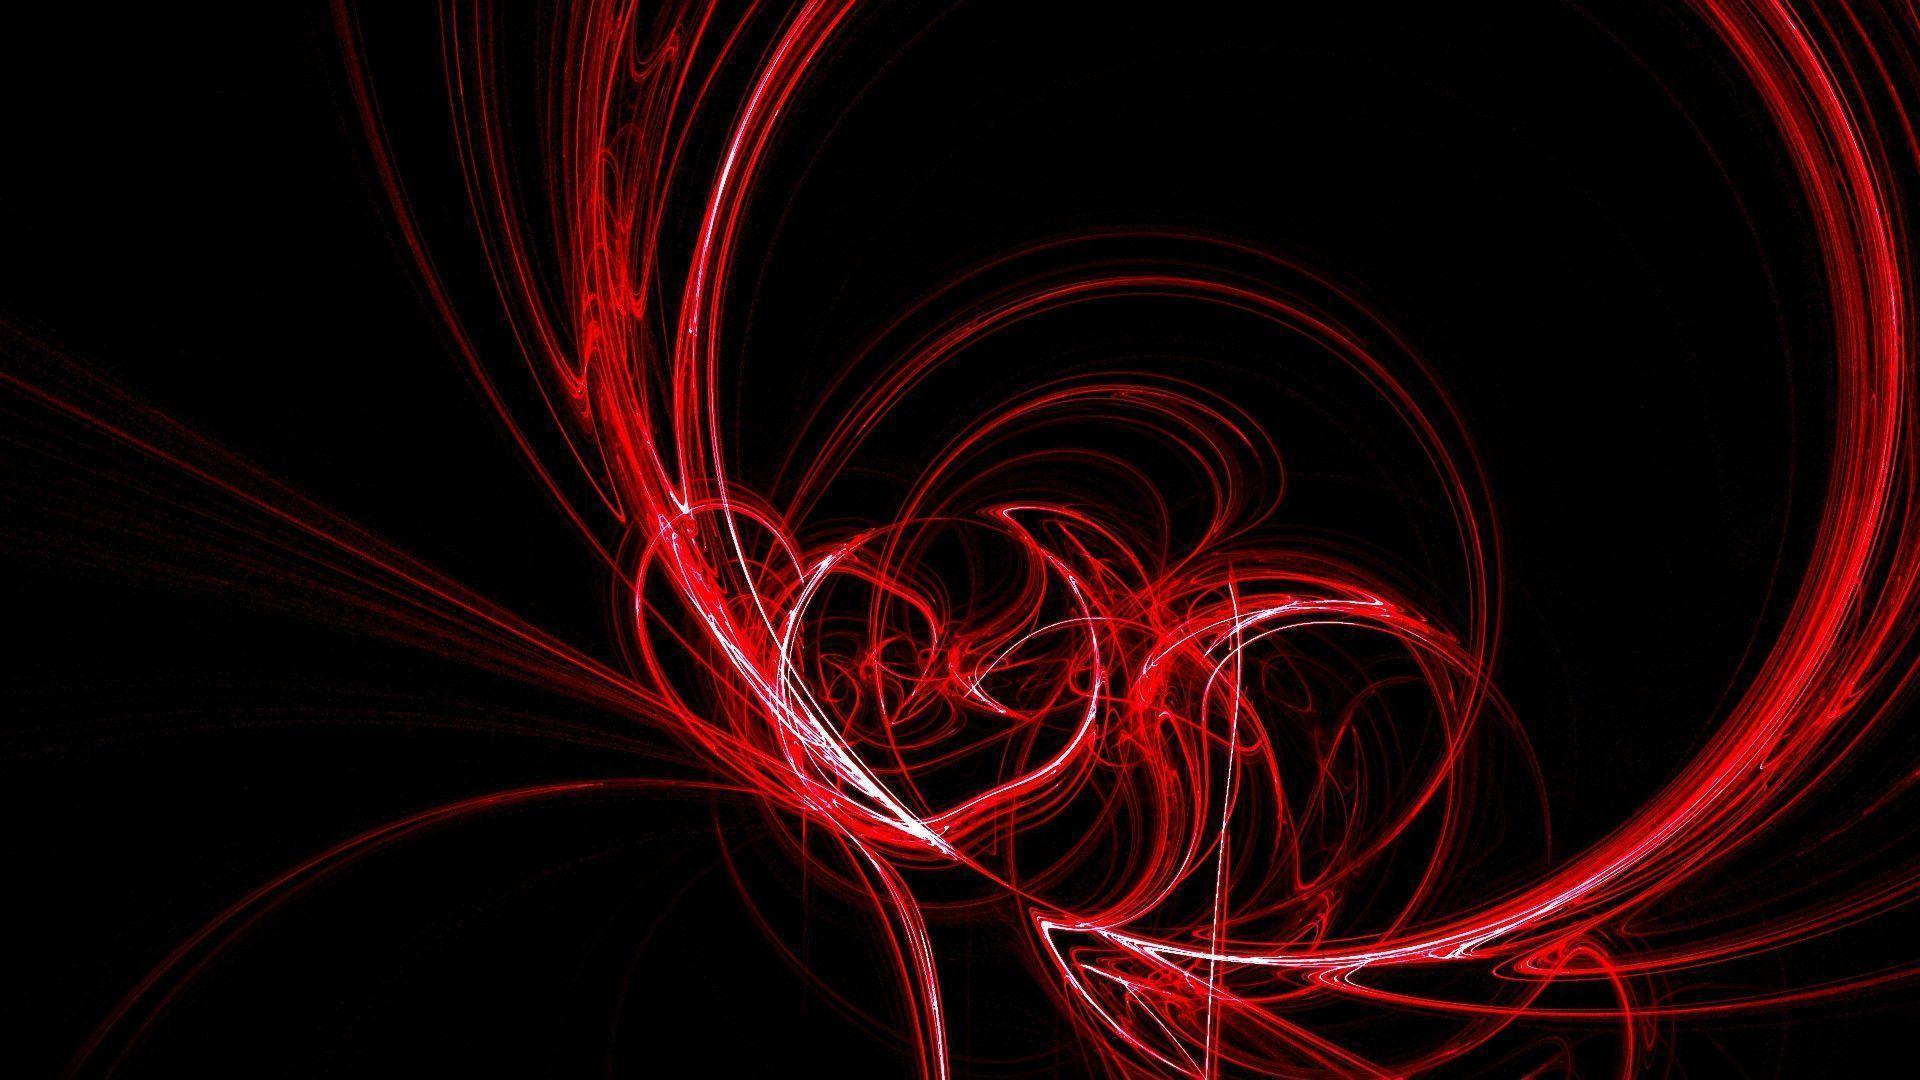 Red And Black Abstract Backgrounds 1920x1080